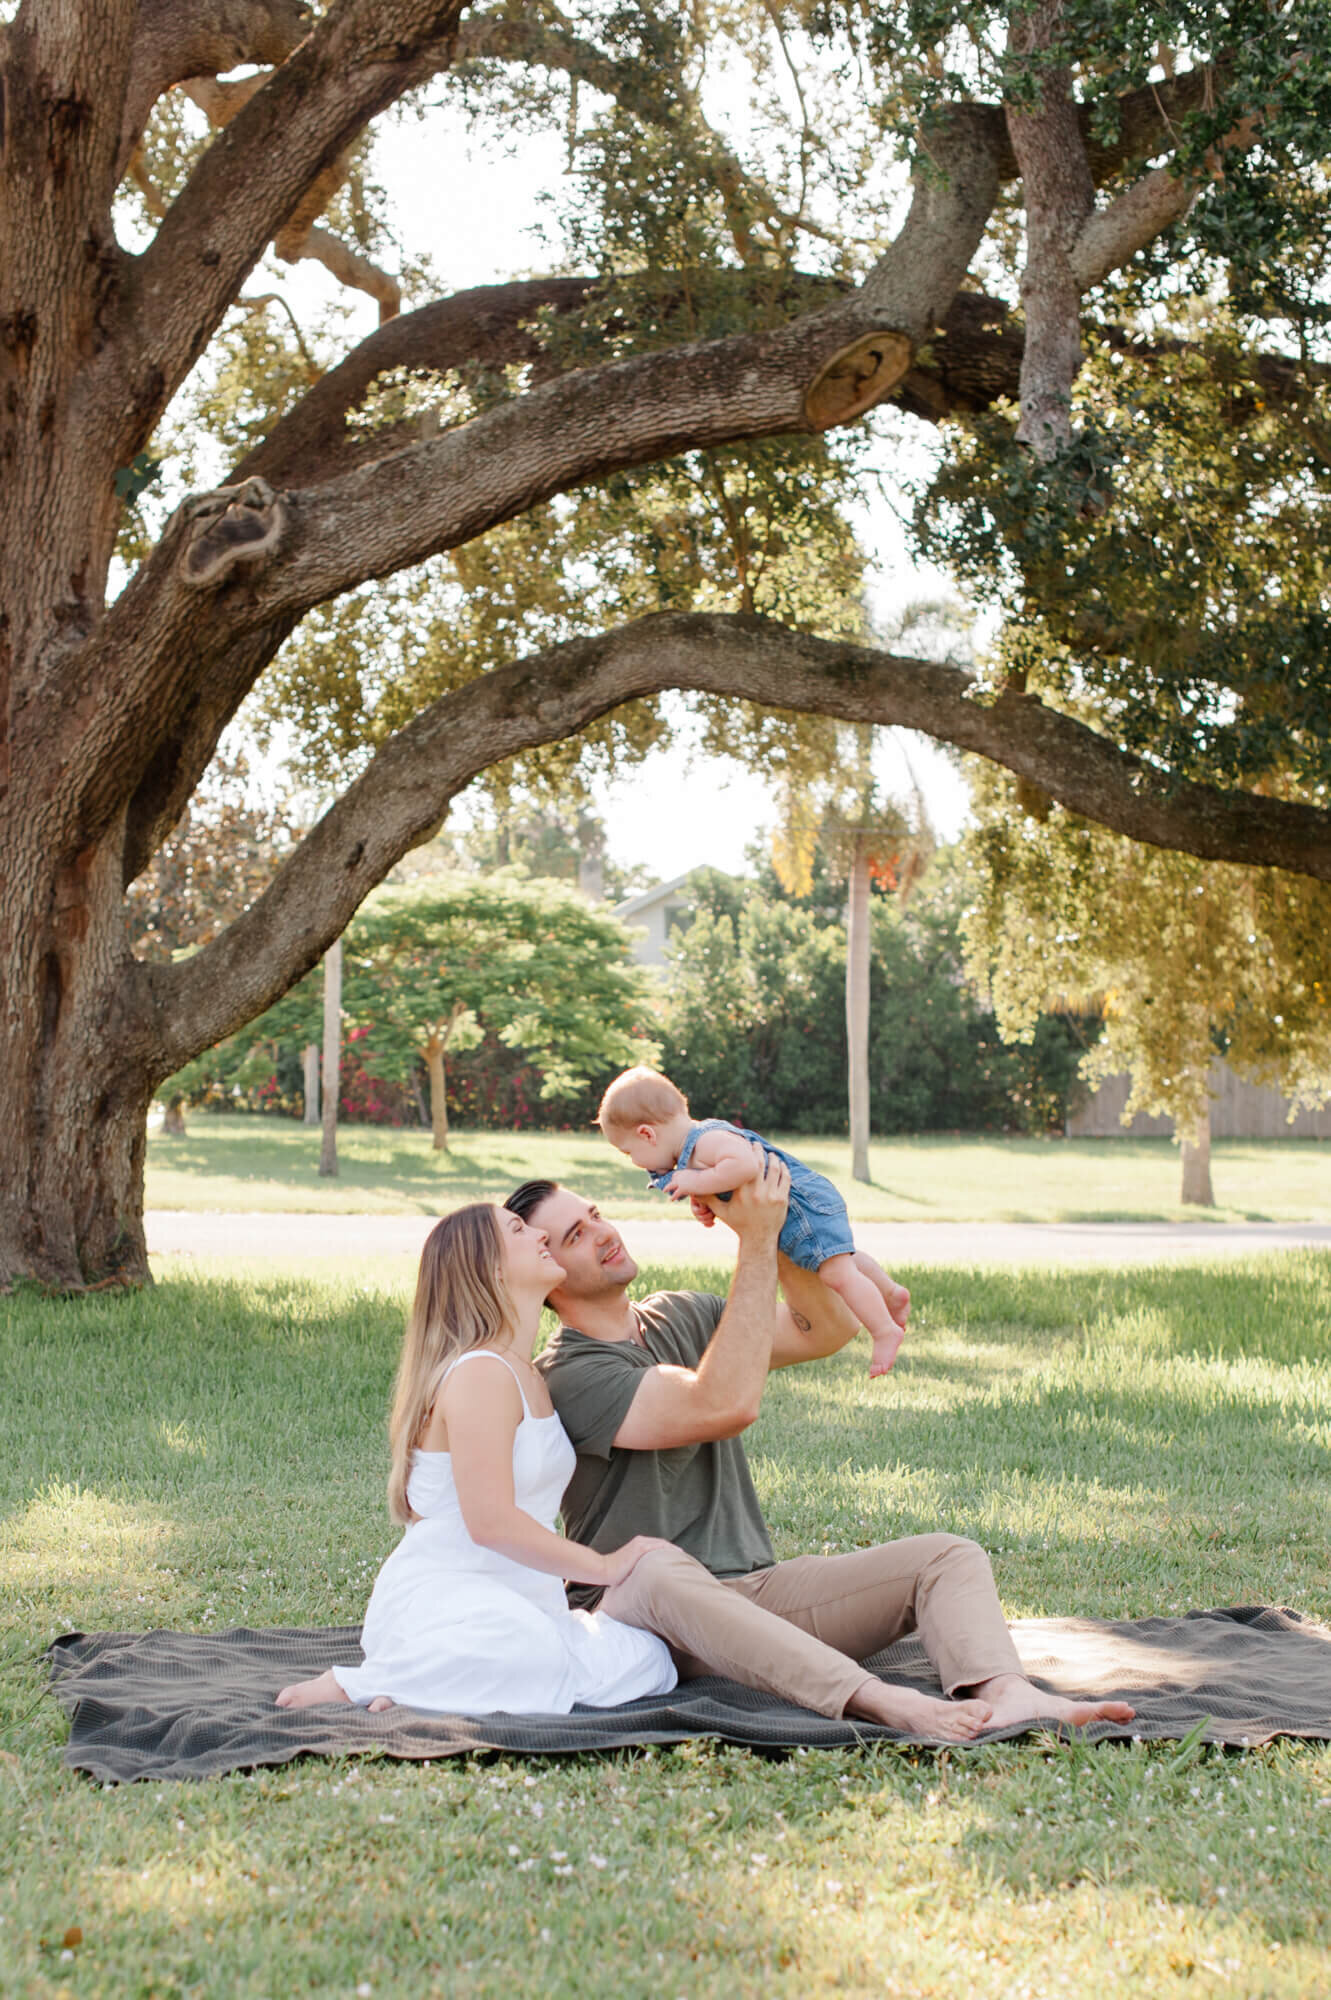 Family sitting on a blanket in the grass in front of a beautiful oak tree holding young son up in the air